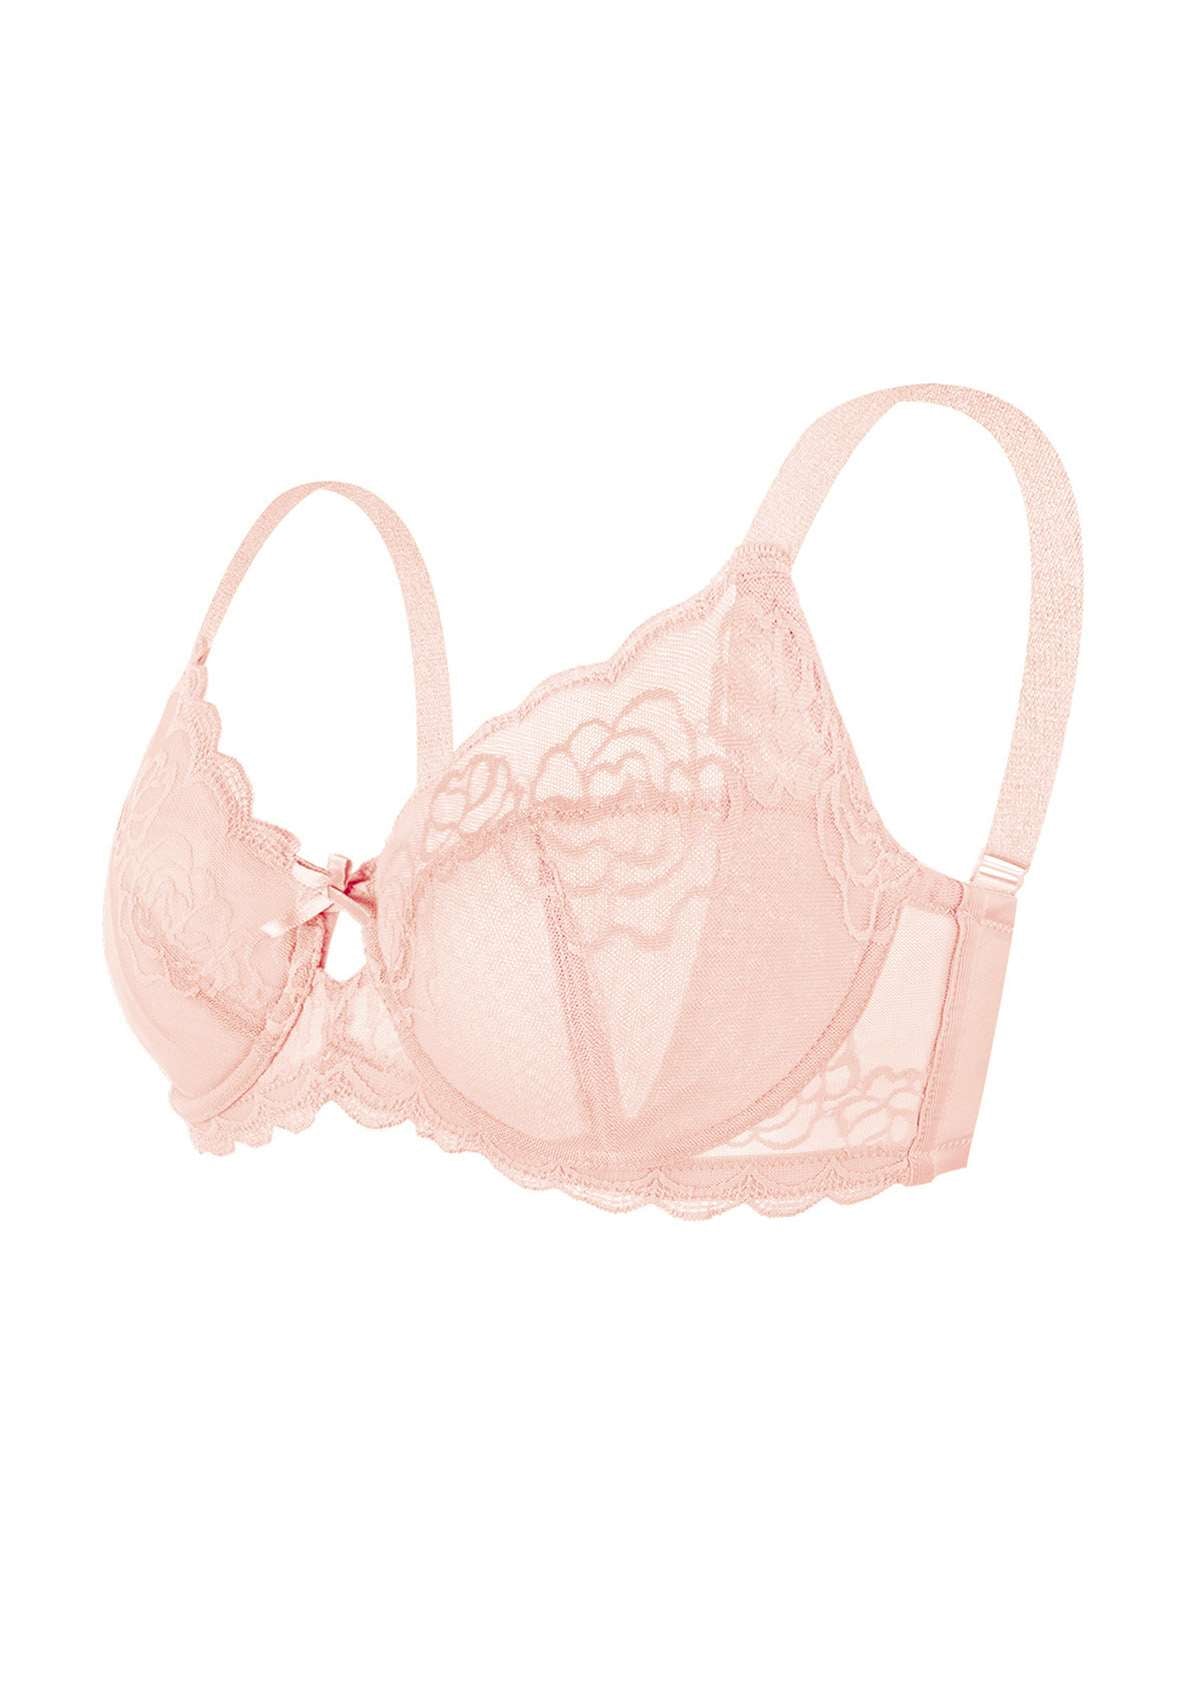 HSIA Rosa Bonica Sheer Lace Mesh Unlined Thin Comfy Woman Bra - Pink / 38 / C